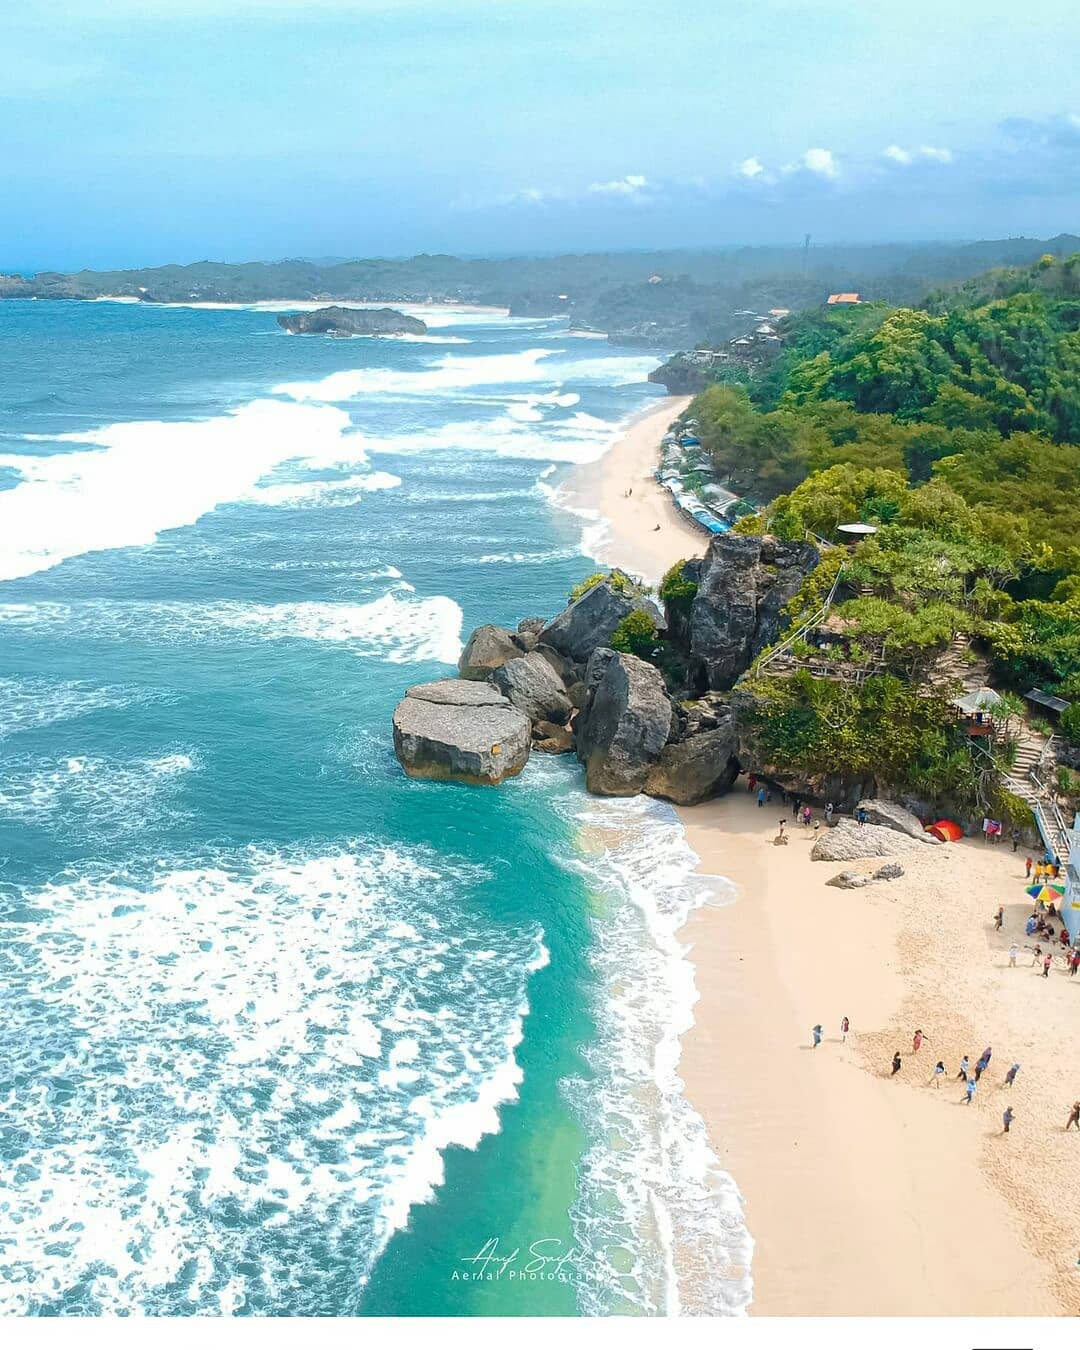 Aerial view of Indrayanti Beach with waves crashing against rocks and lush green hills in the background.